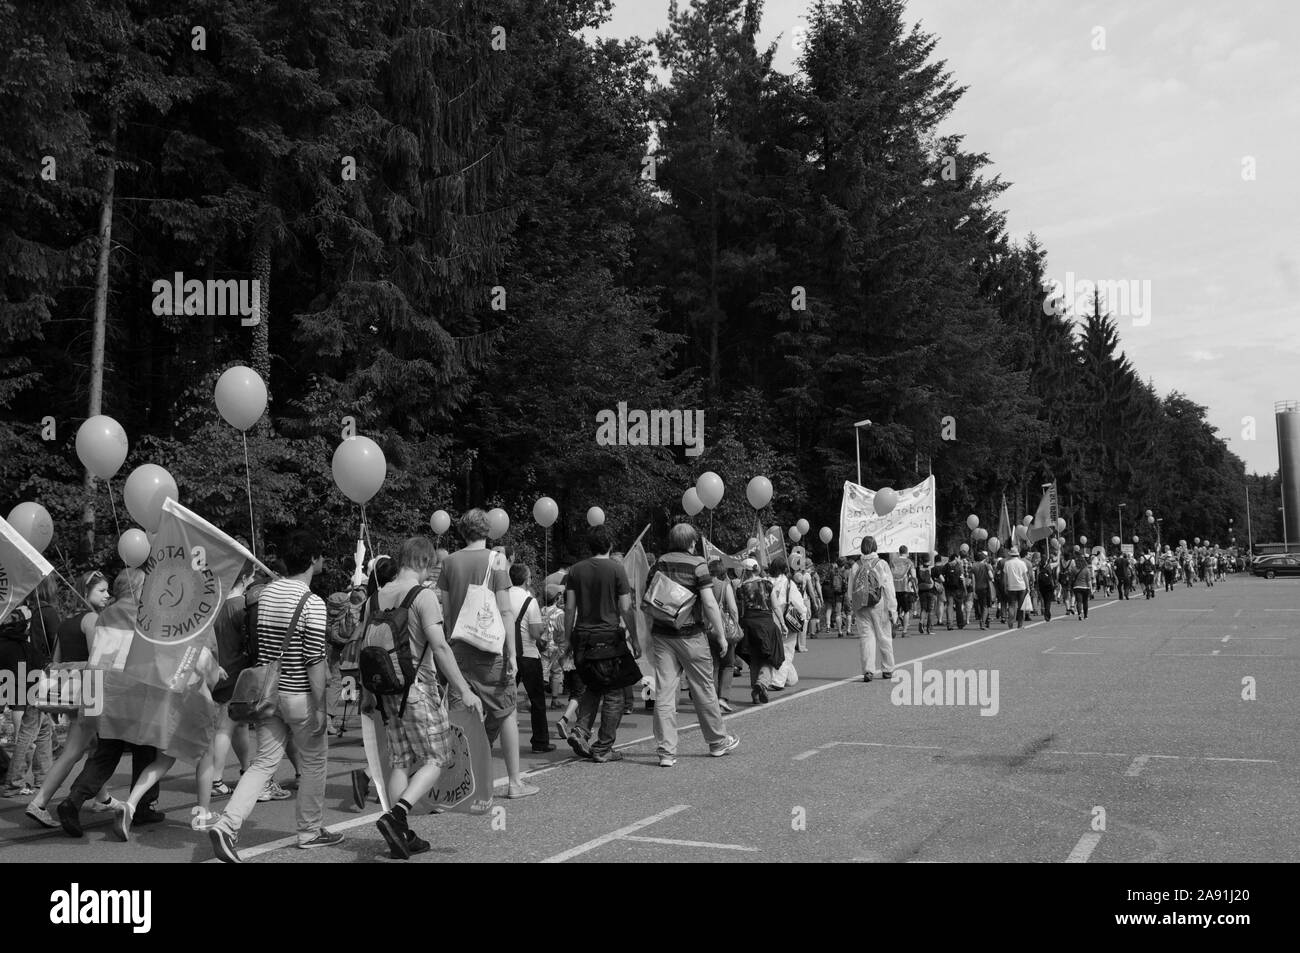 Thousands of anti atomic protesters come together in Döttingen, demanding for nuclear free energy future. Stock Photo